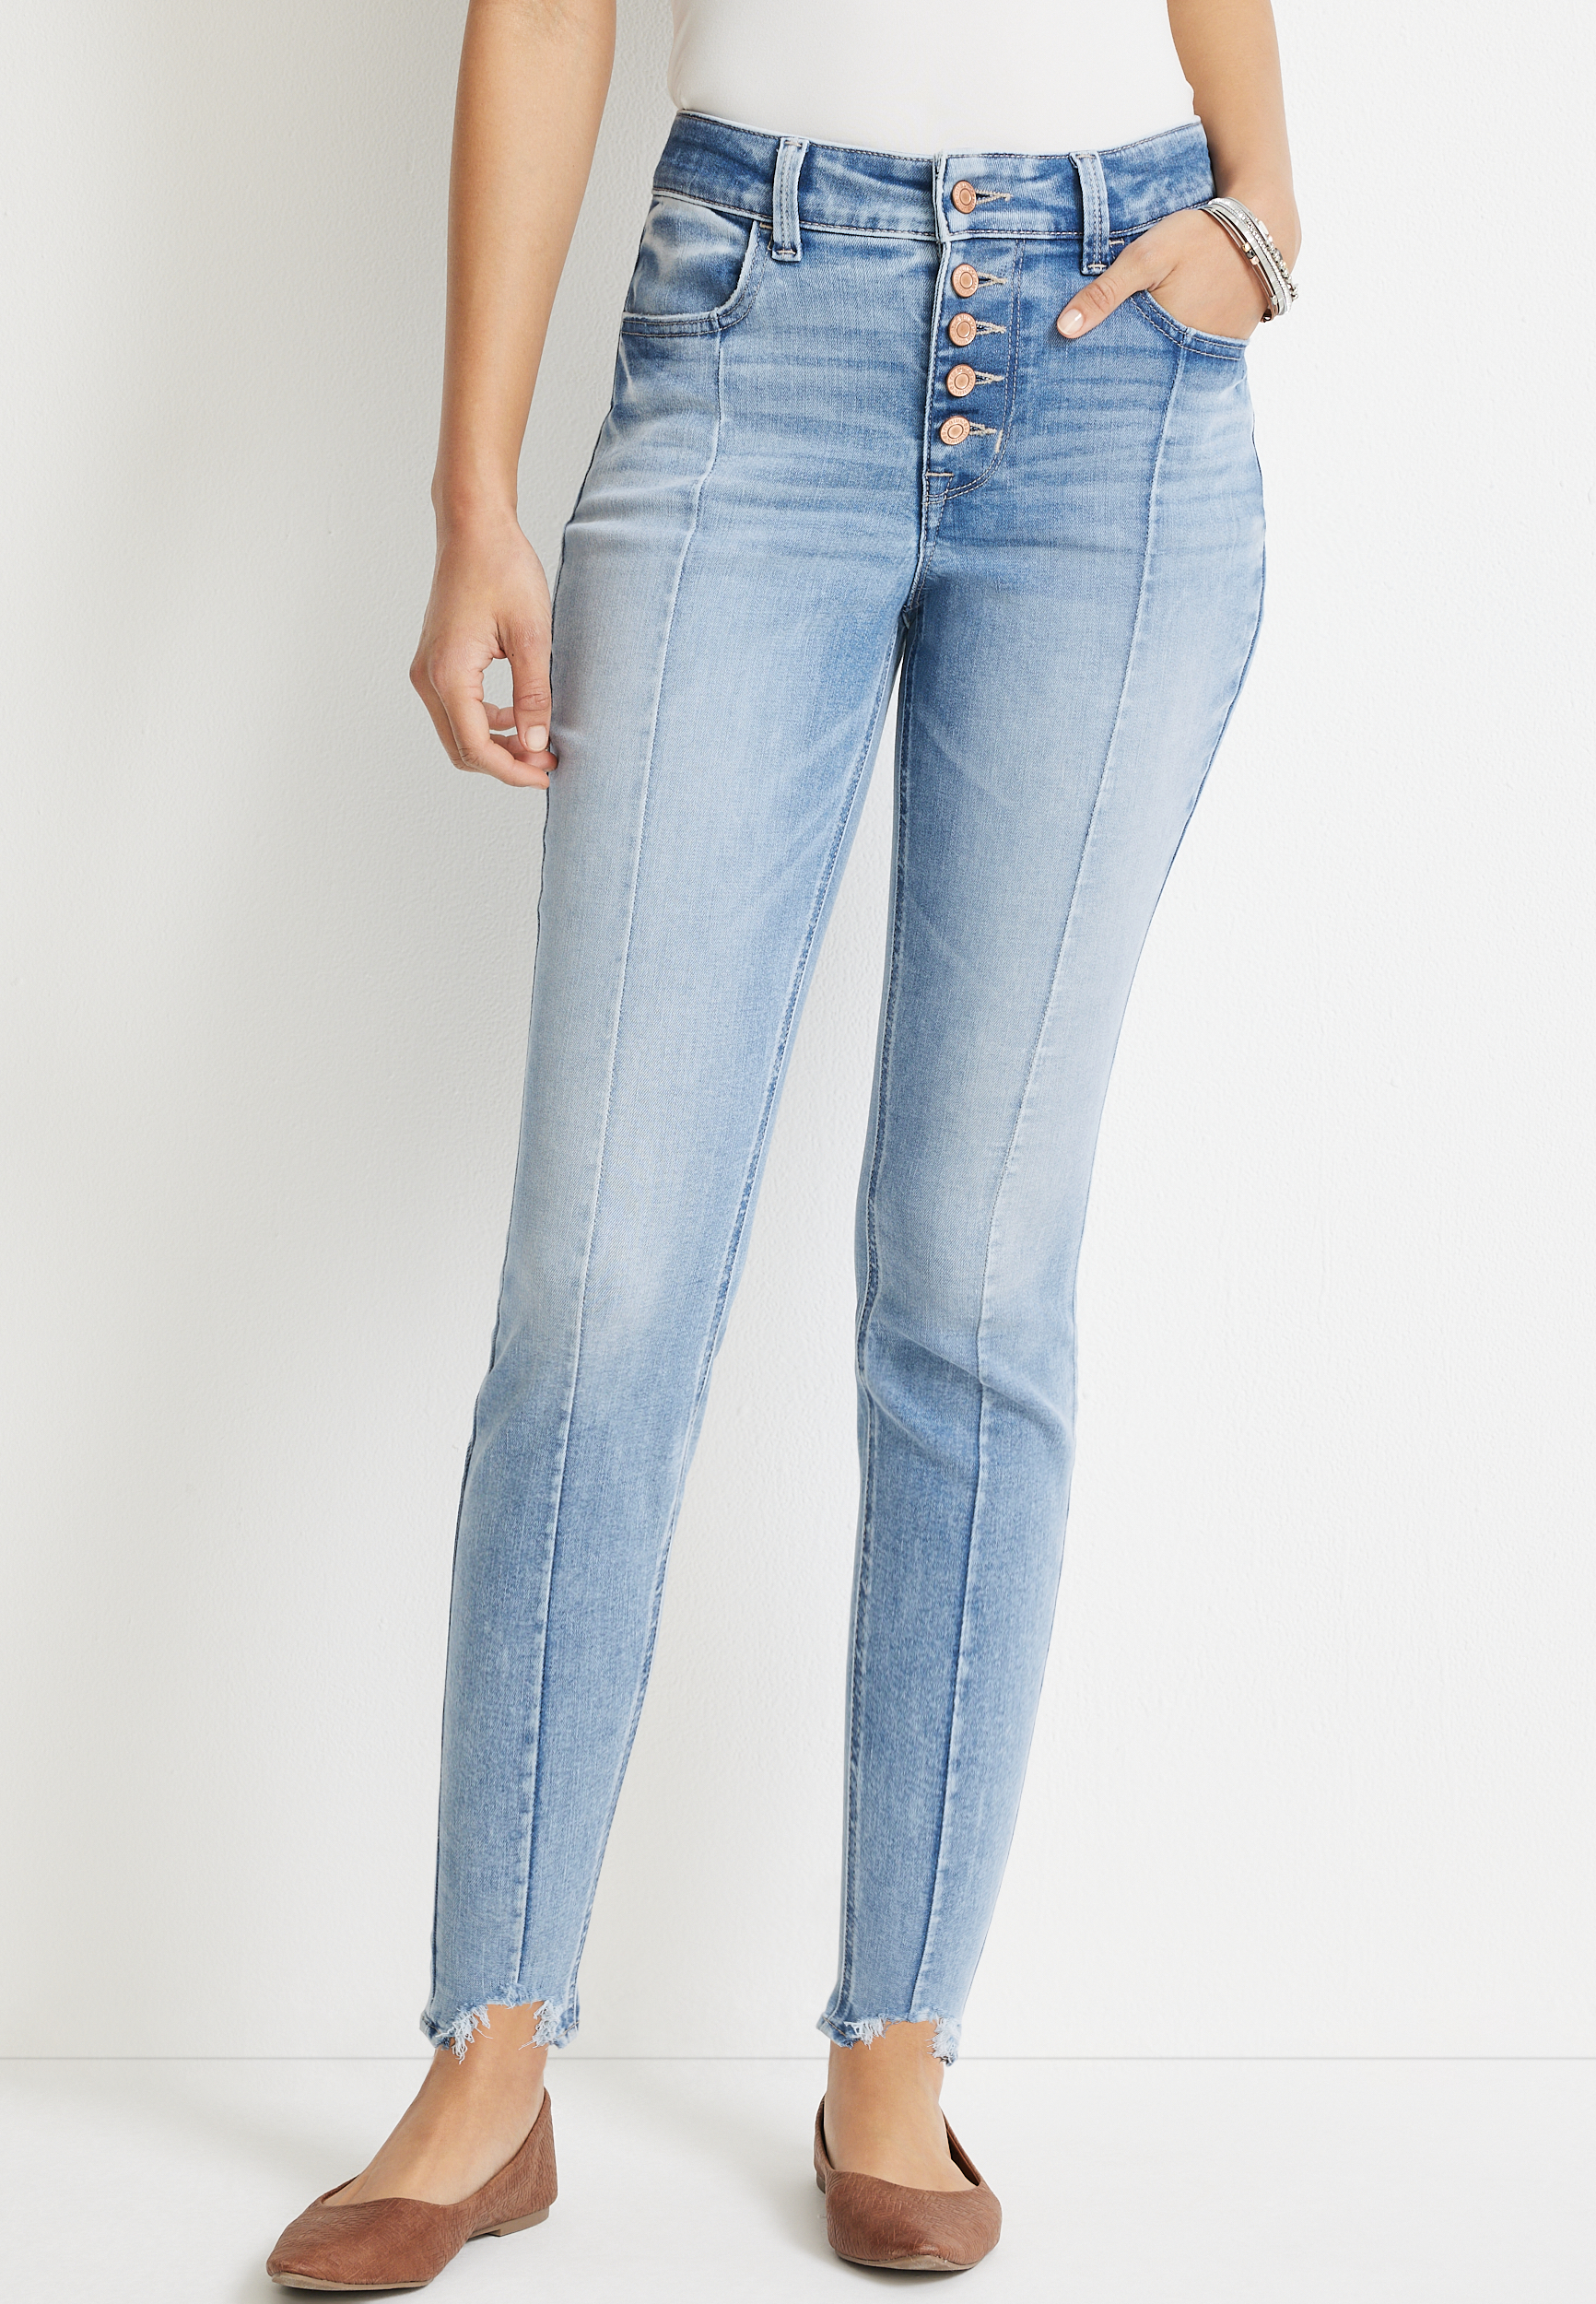 m jeans by maurices™ Cool Comfort High Rise Button Fly Jegging | maurices